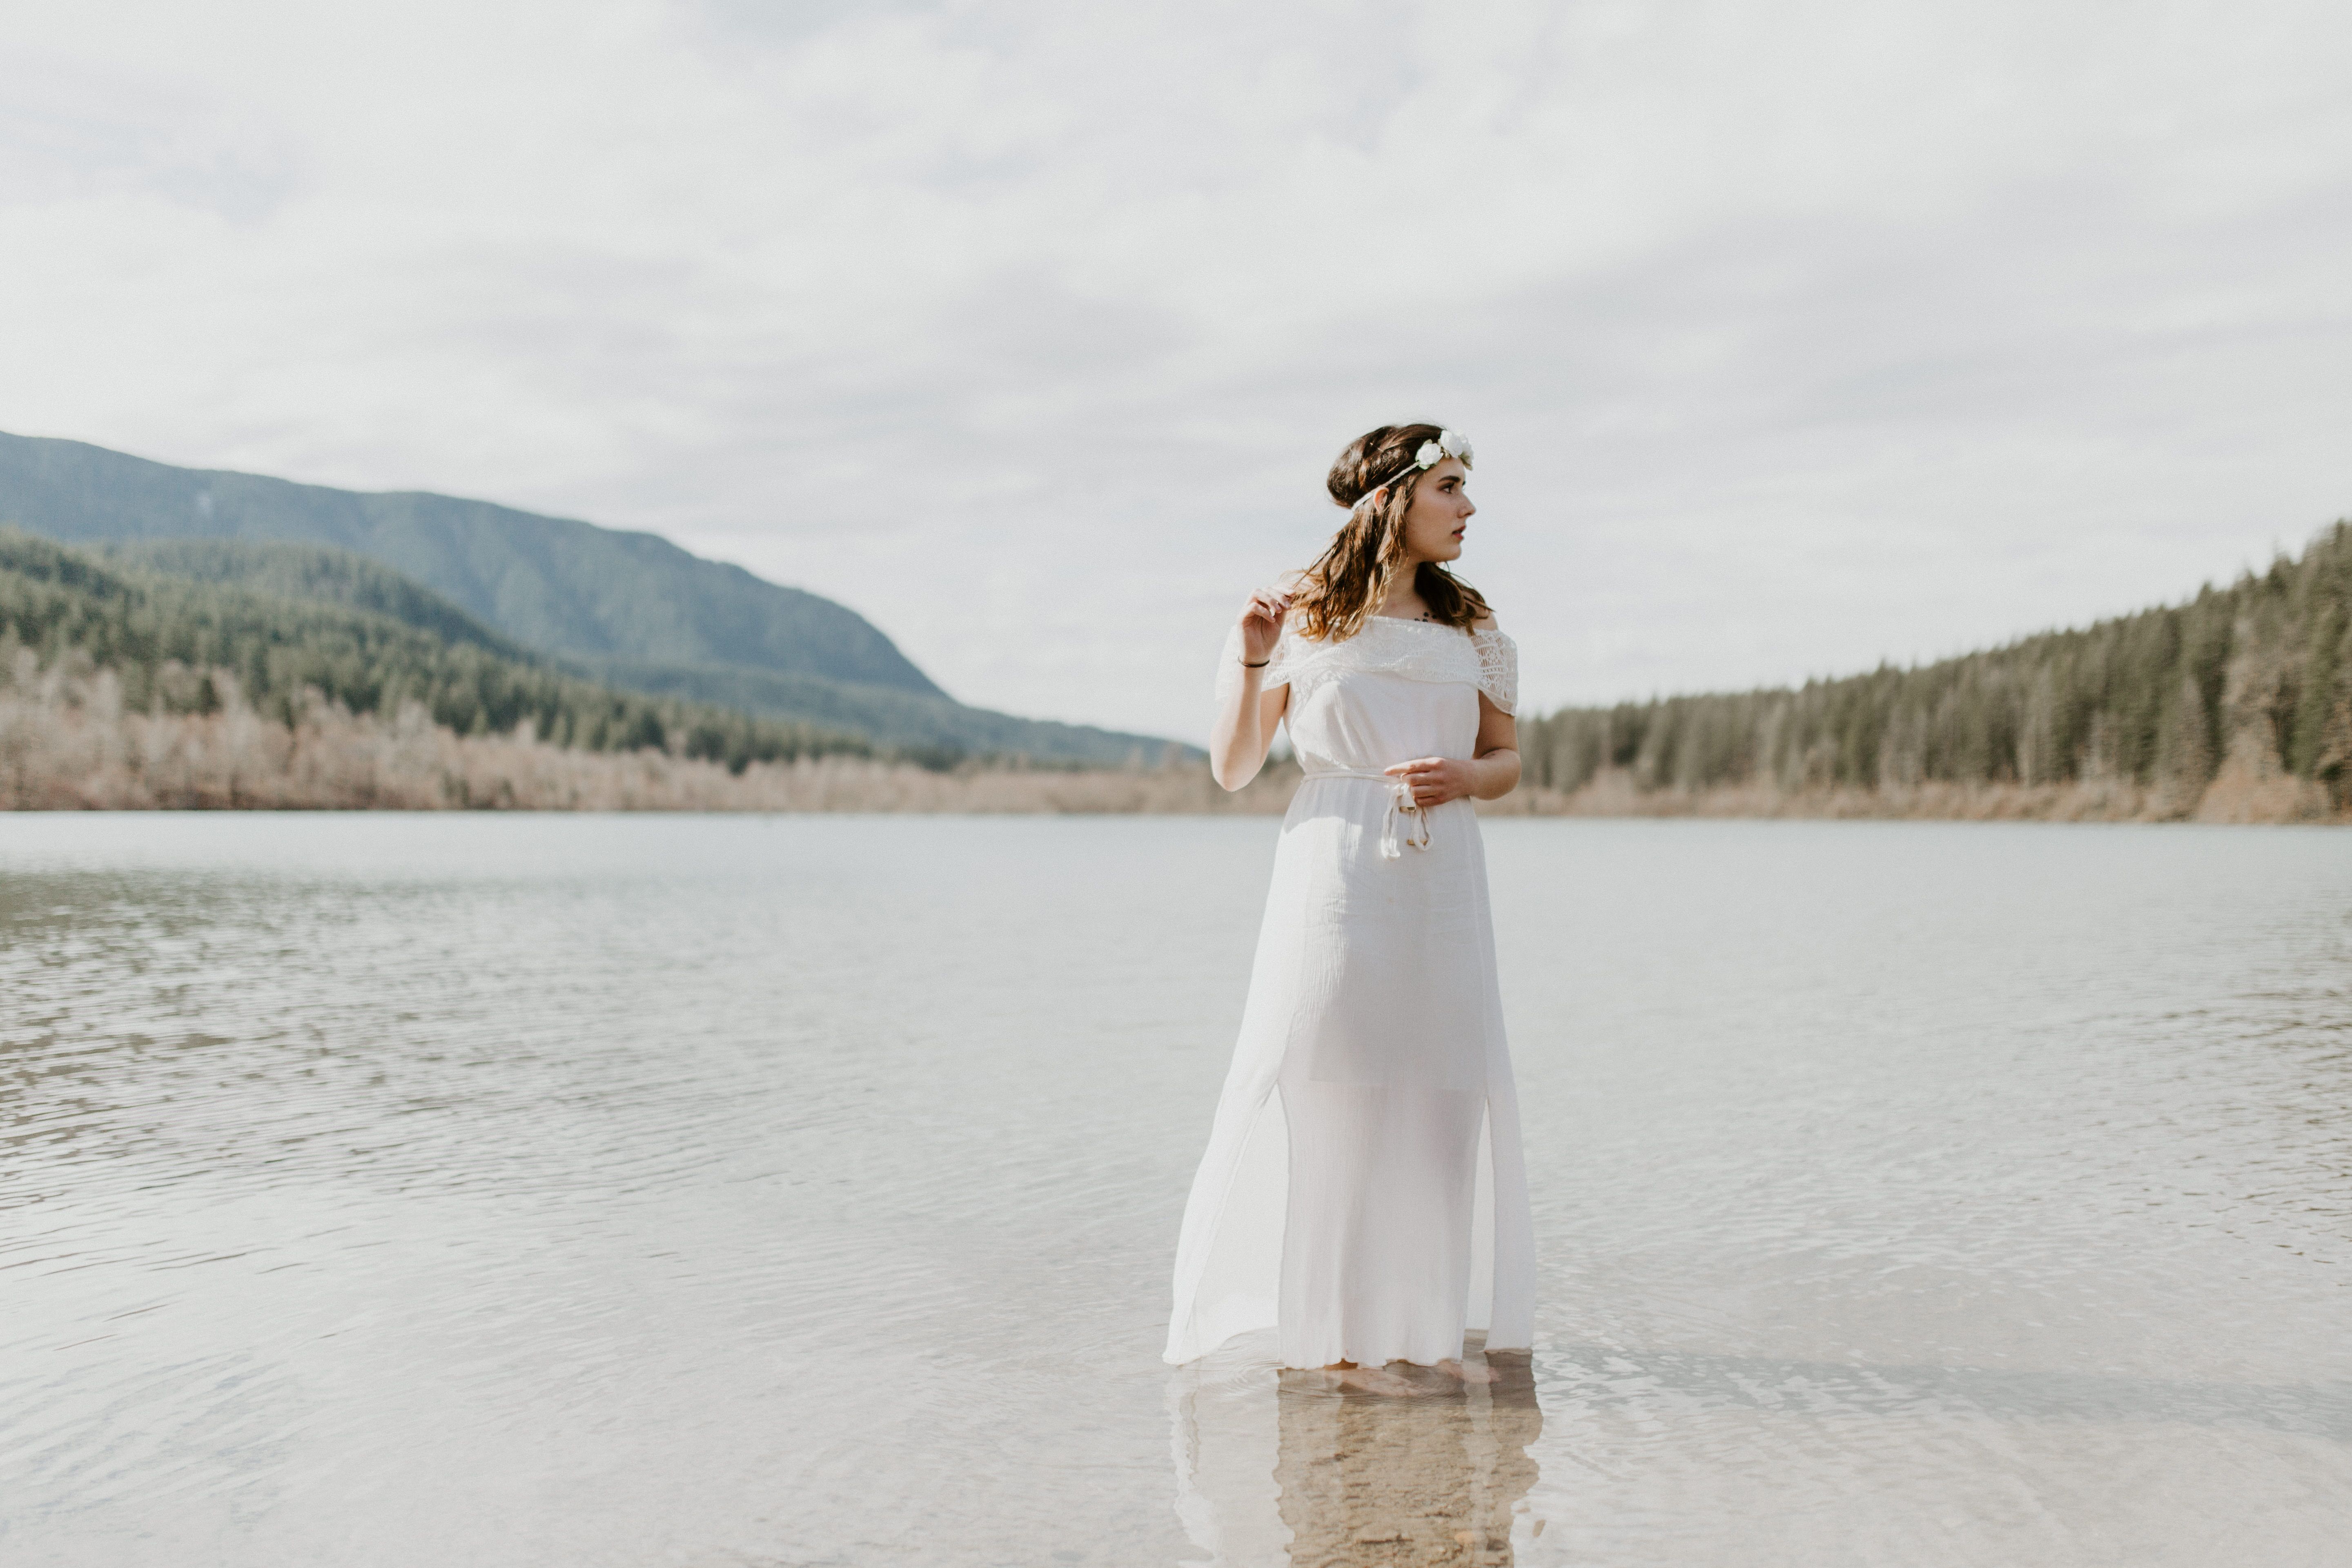 Winnifred stands in Rattlesnake Lake with the view of the trees behind her. Elopement adventure shoot at Rattlesnake Lake, Washington.